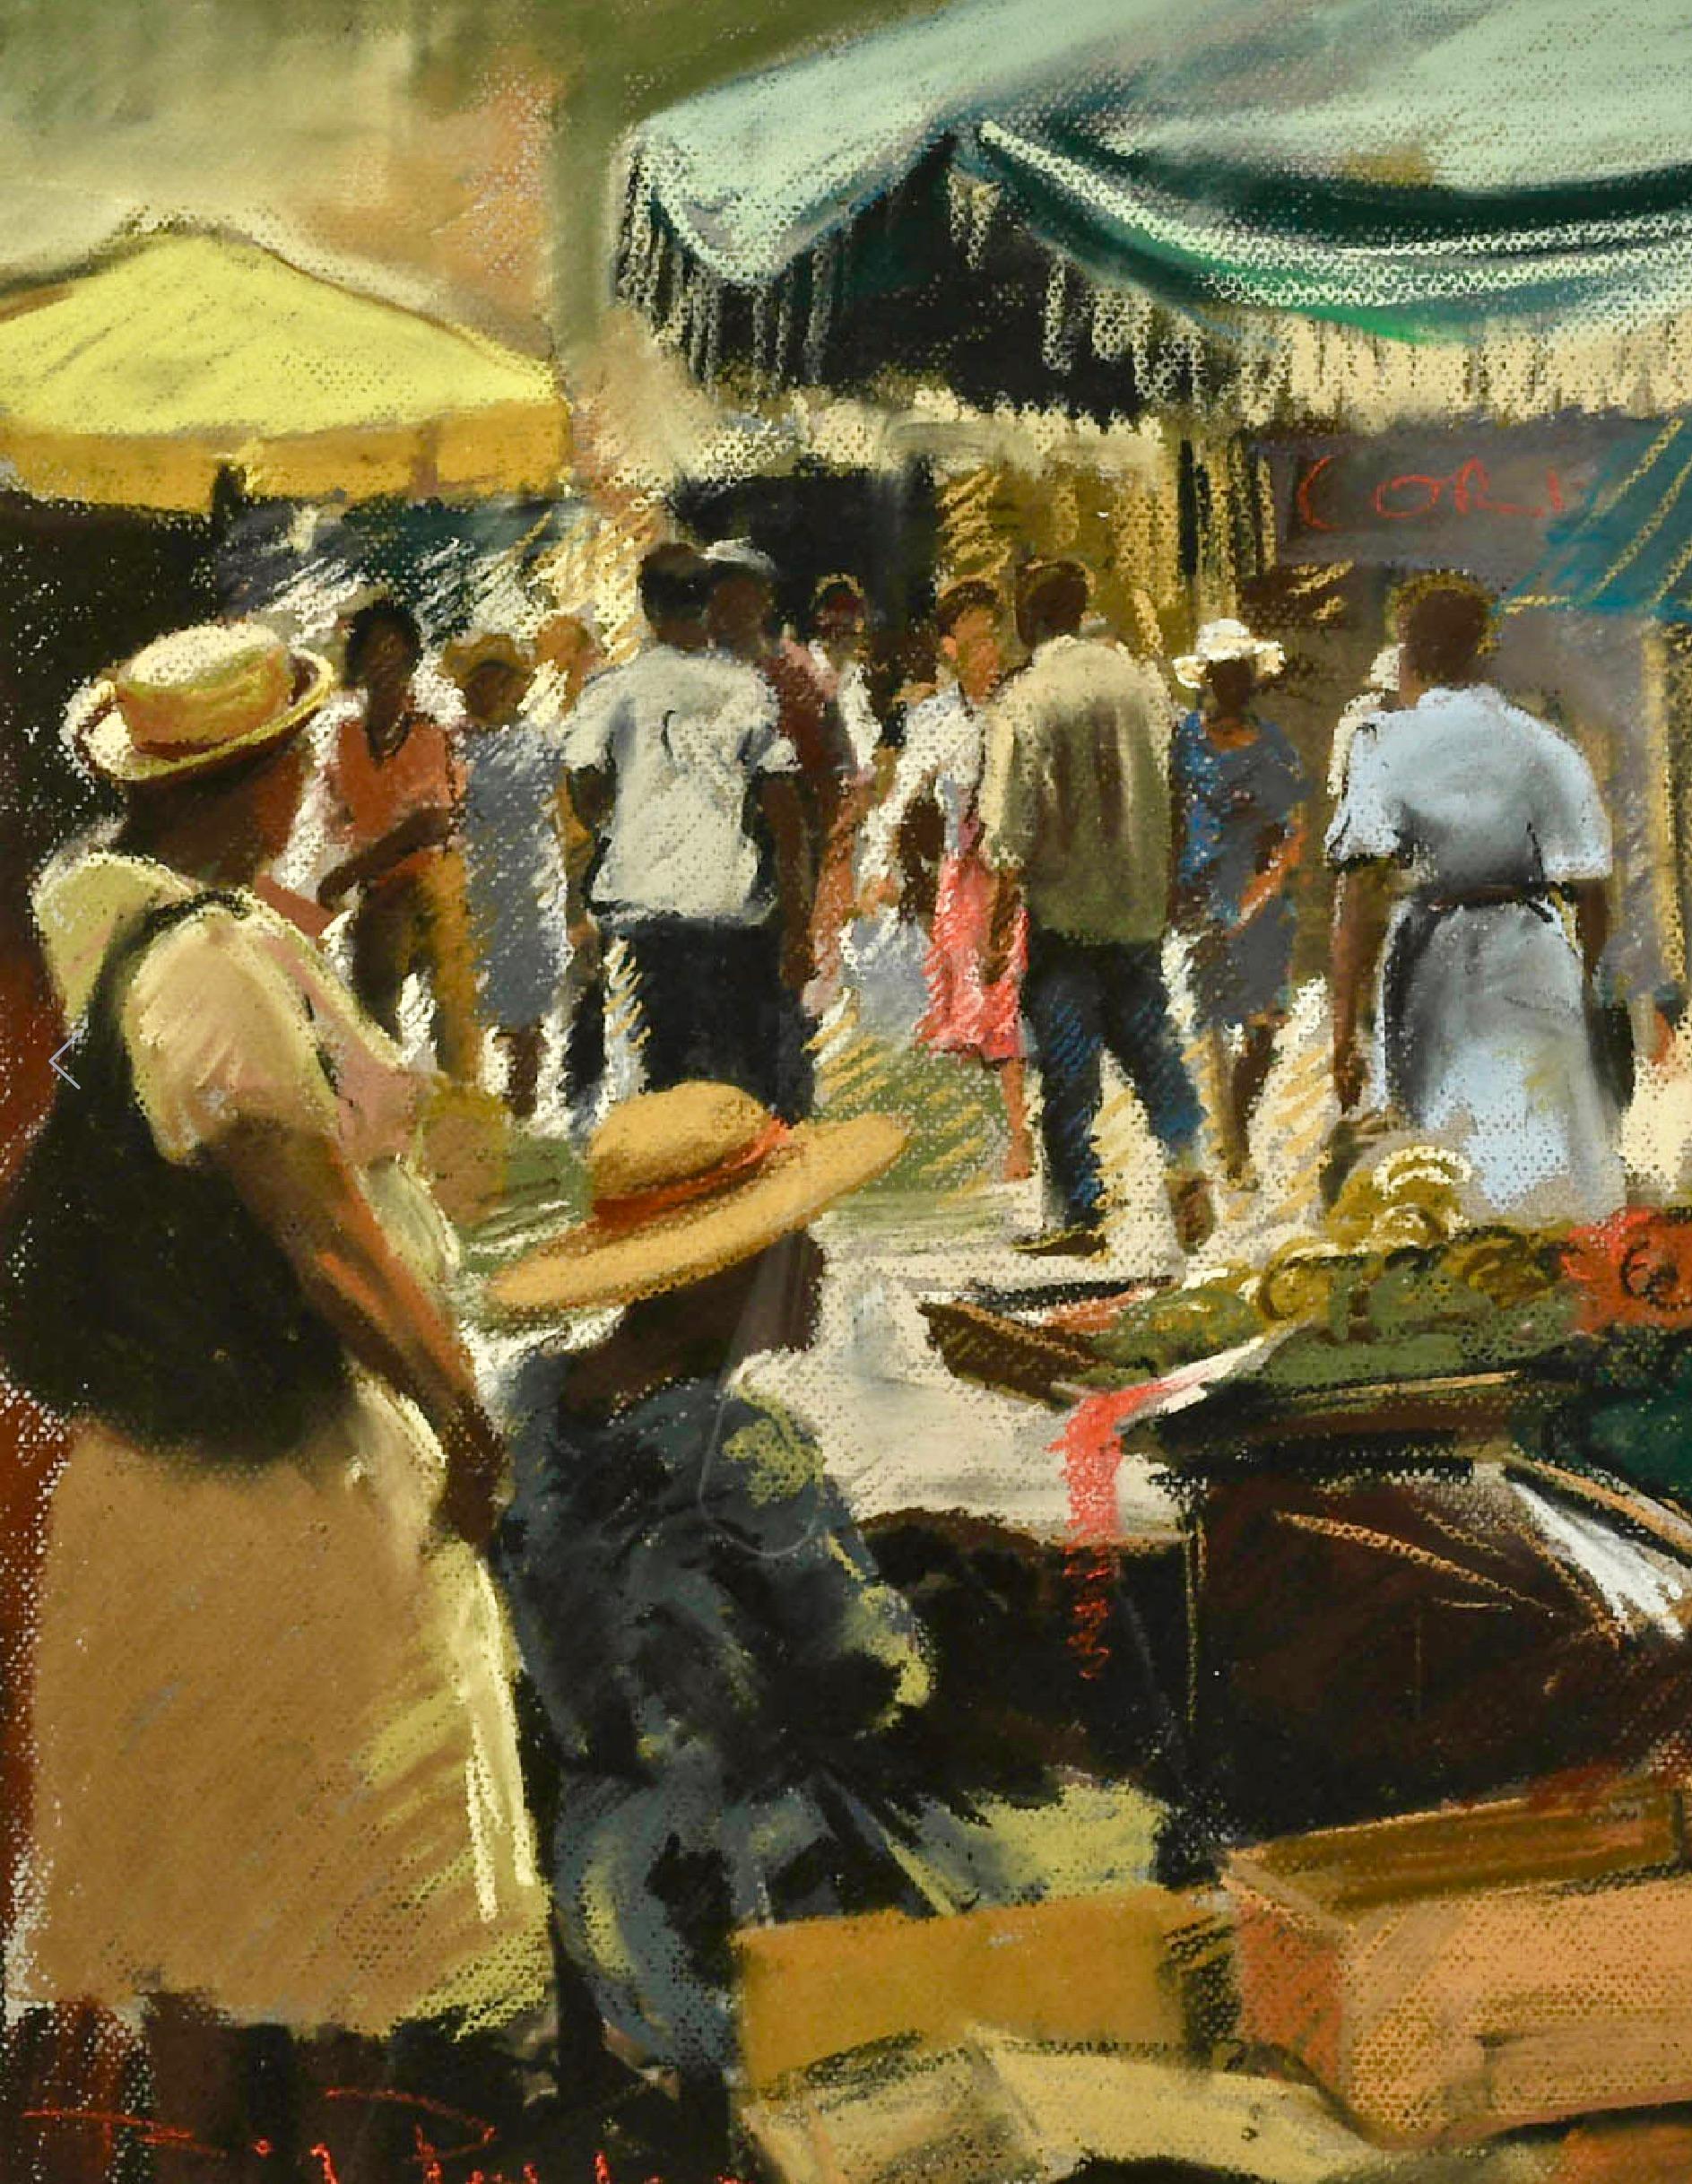 In every work of art, Petley incorporates a play of light and shadows. As he moves from his natural medium of oil to watercolour or pastel to sanguine, there remains a certain youthful light emanates from his paintings. A plein air painter, his